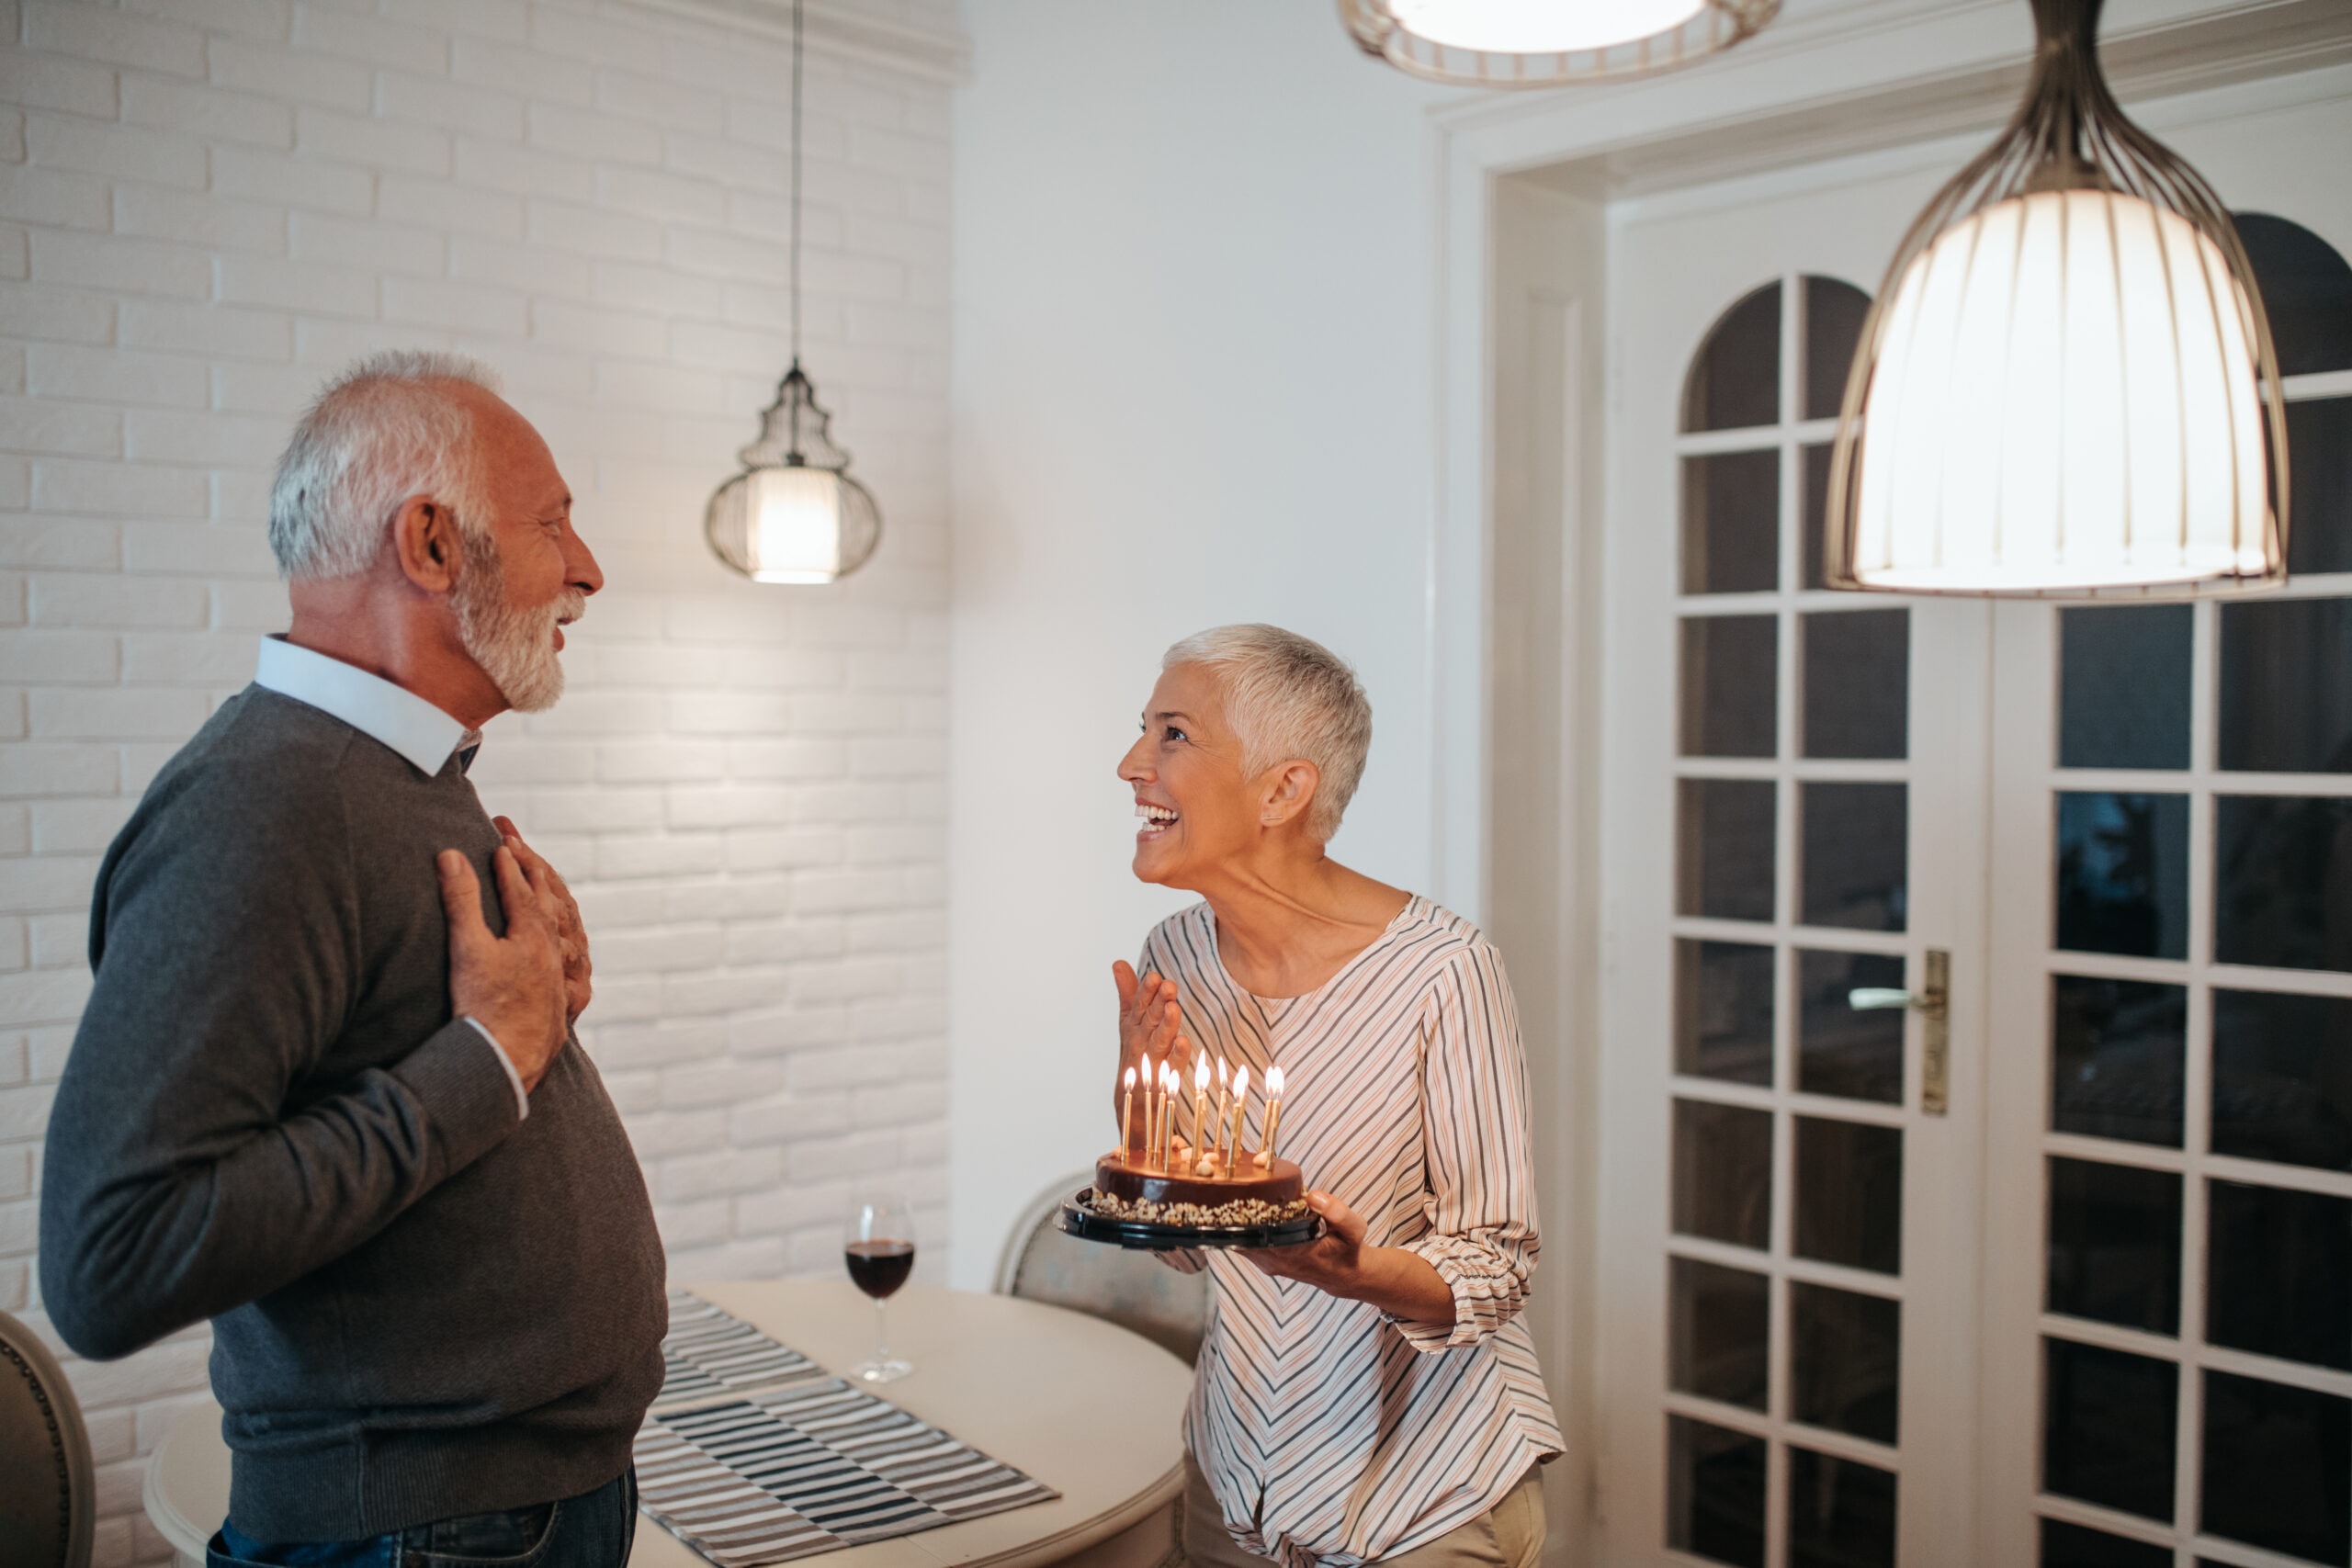 Mature woman surprising her husband with a birthday cake